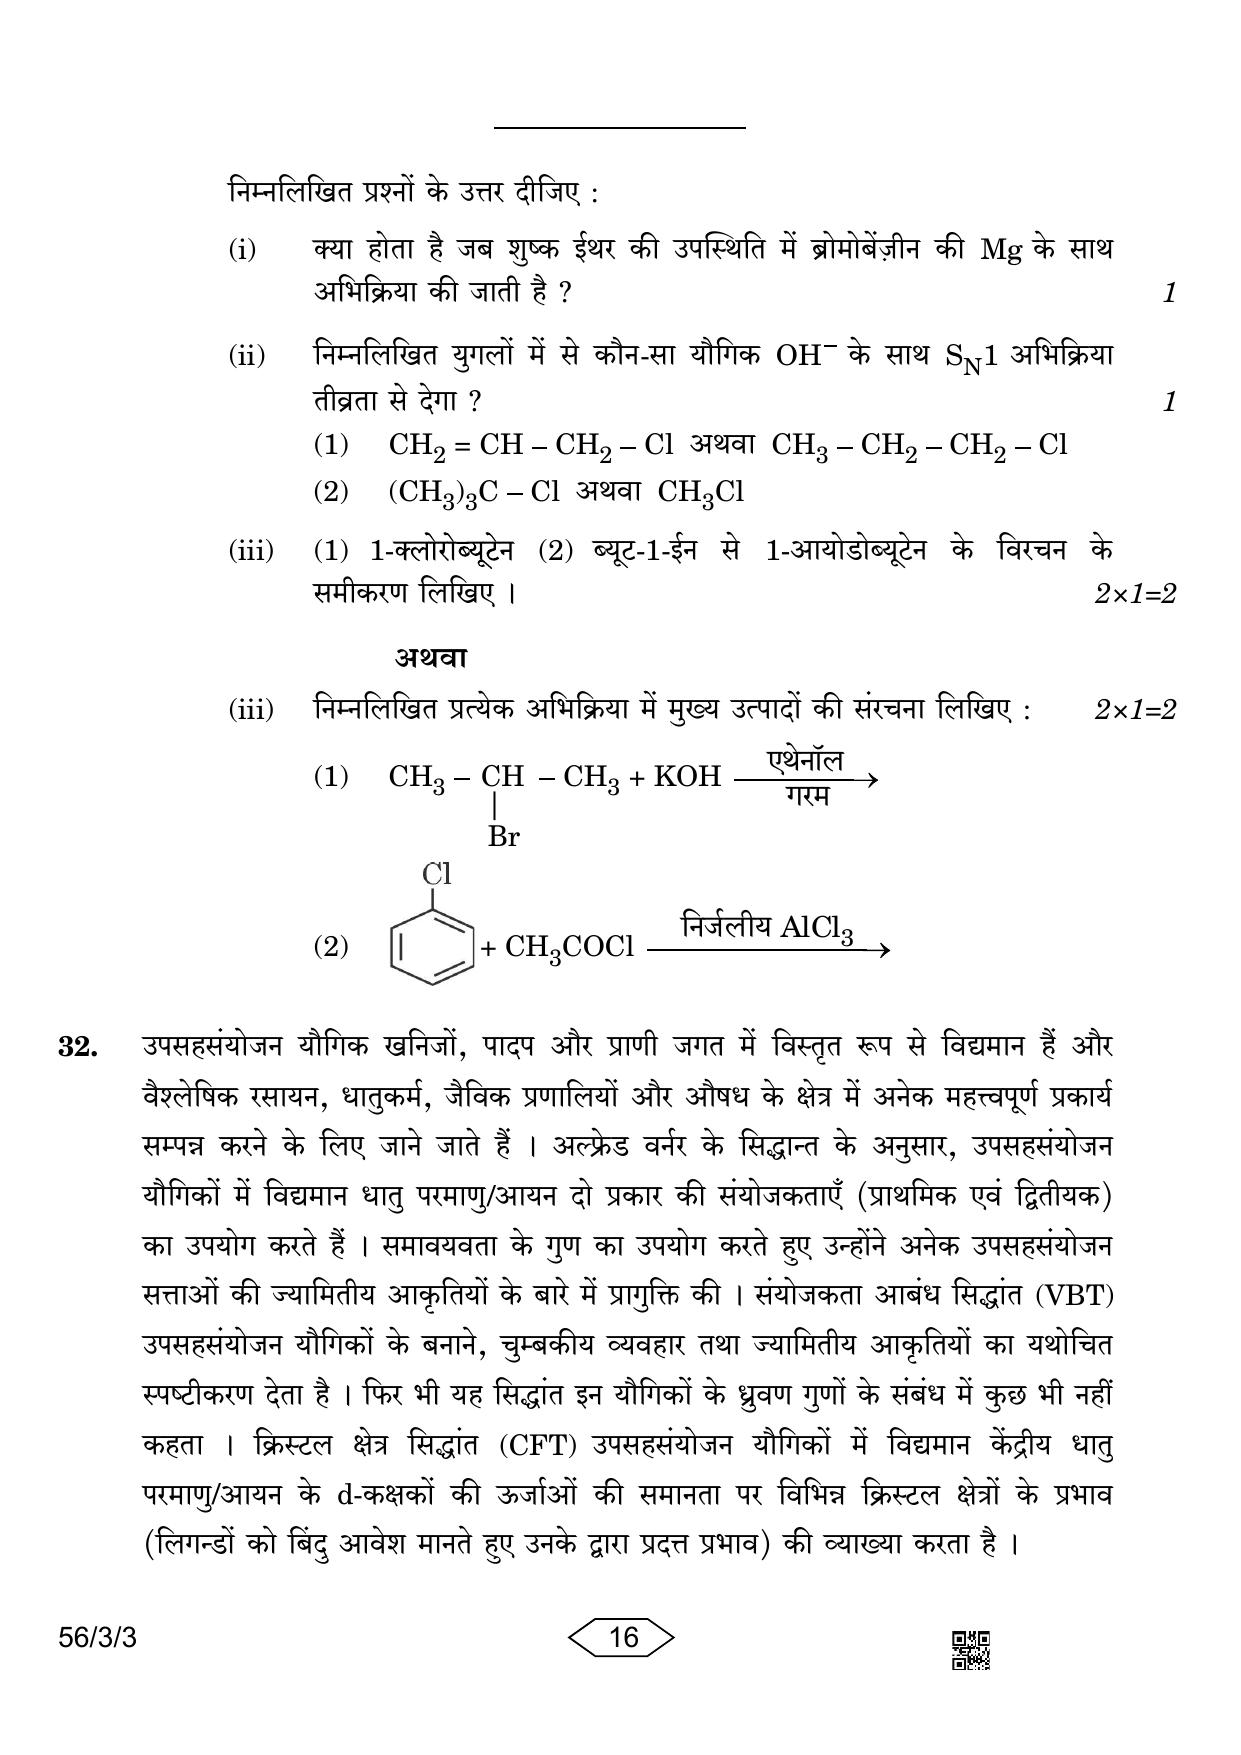 CBSE Class 12 56-3-3 Chemistry 2023 Question Paper - Page 16